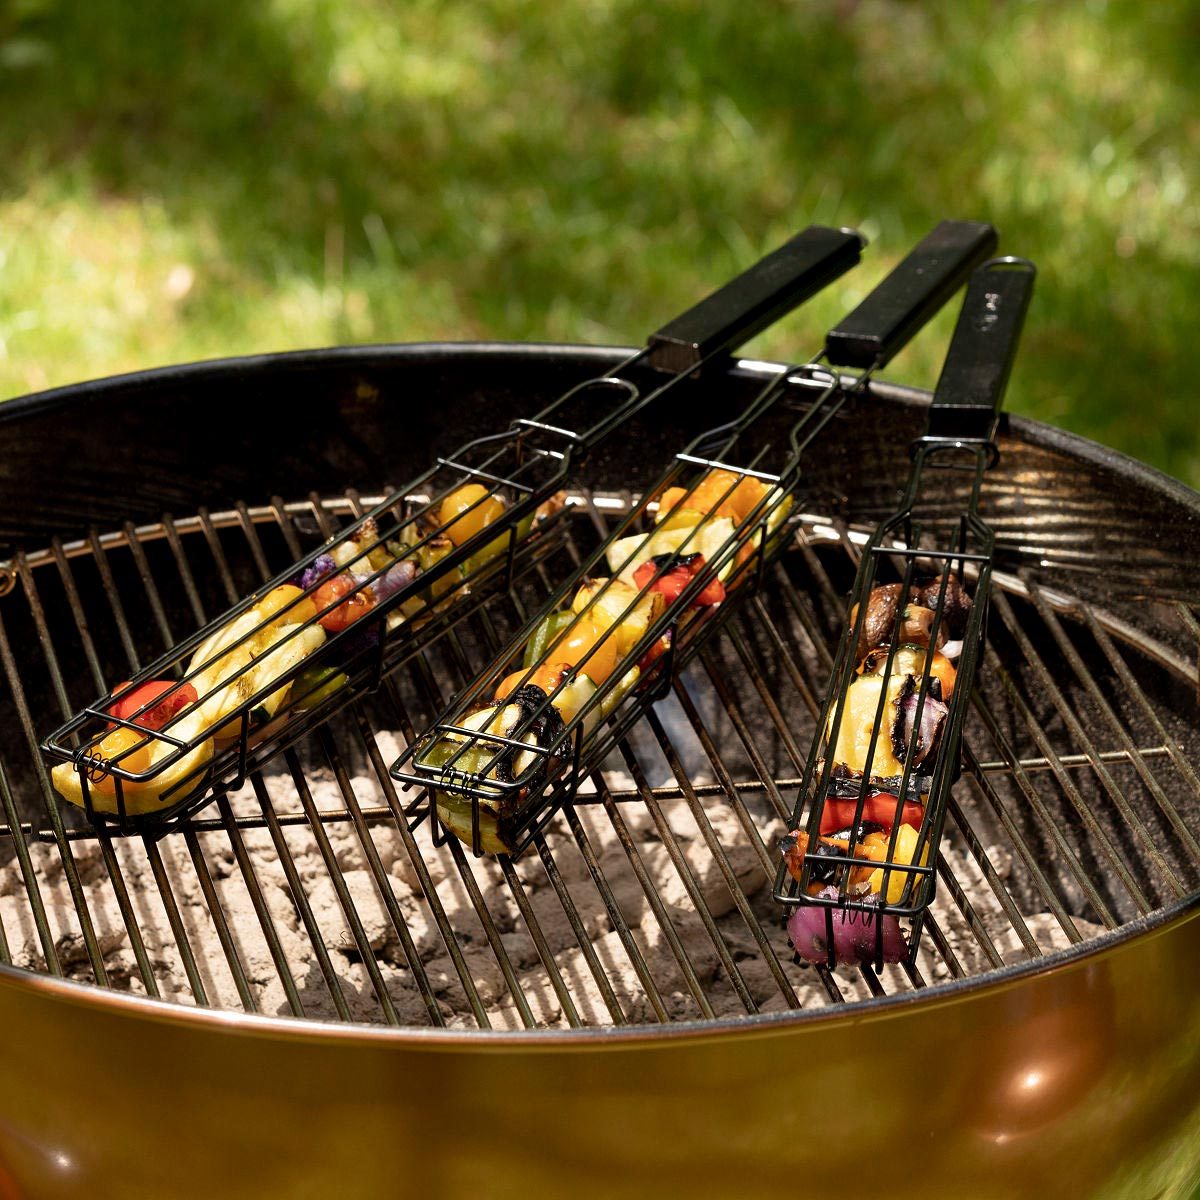 Alpha Grillers Premium Wood Grilling Gifts for Men - Grill Accessories